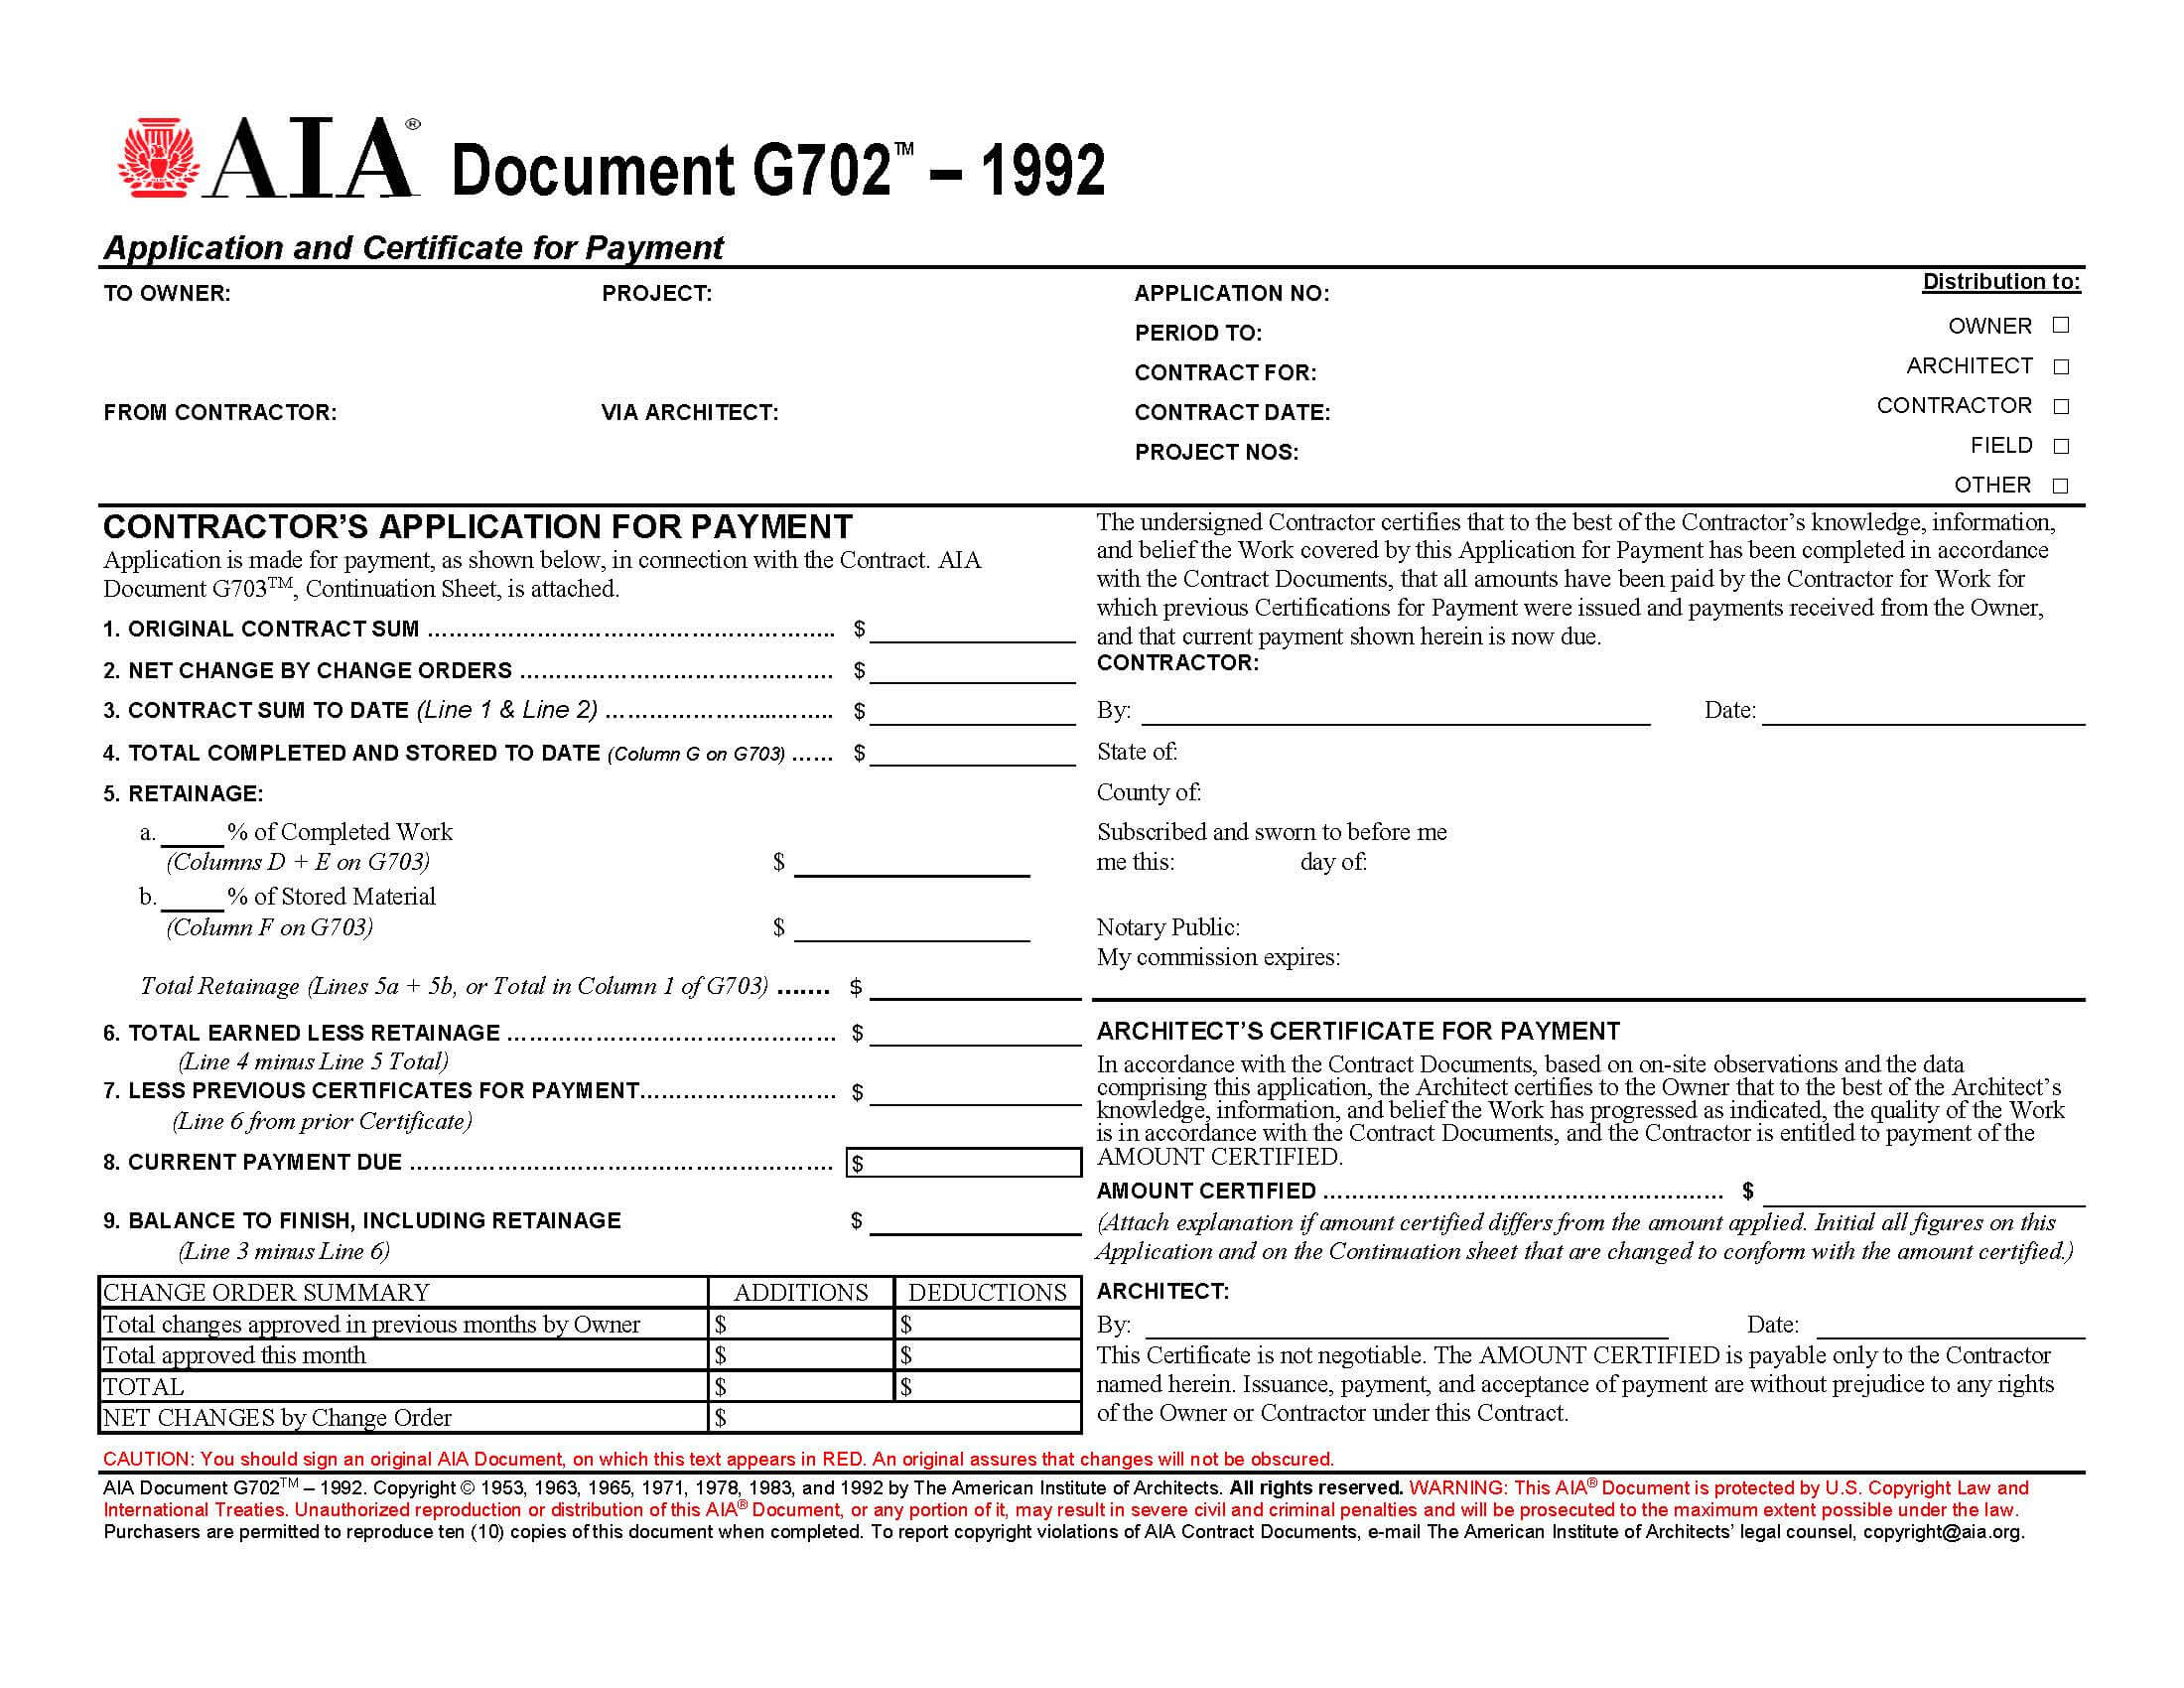 Aia Forms G702 & G703 Application, Certificate, And Continuation In